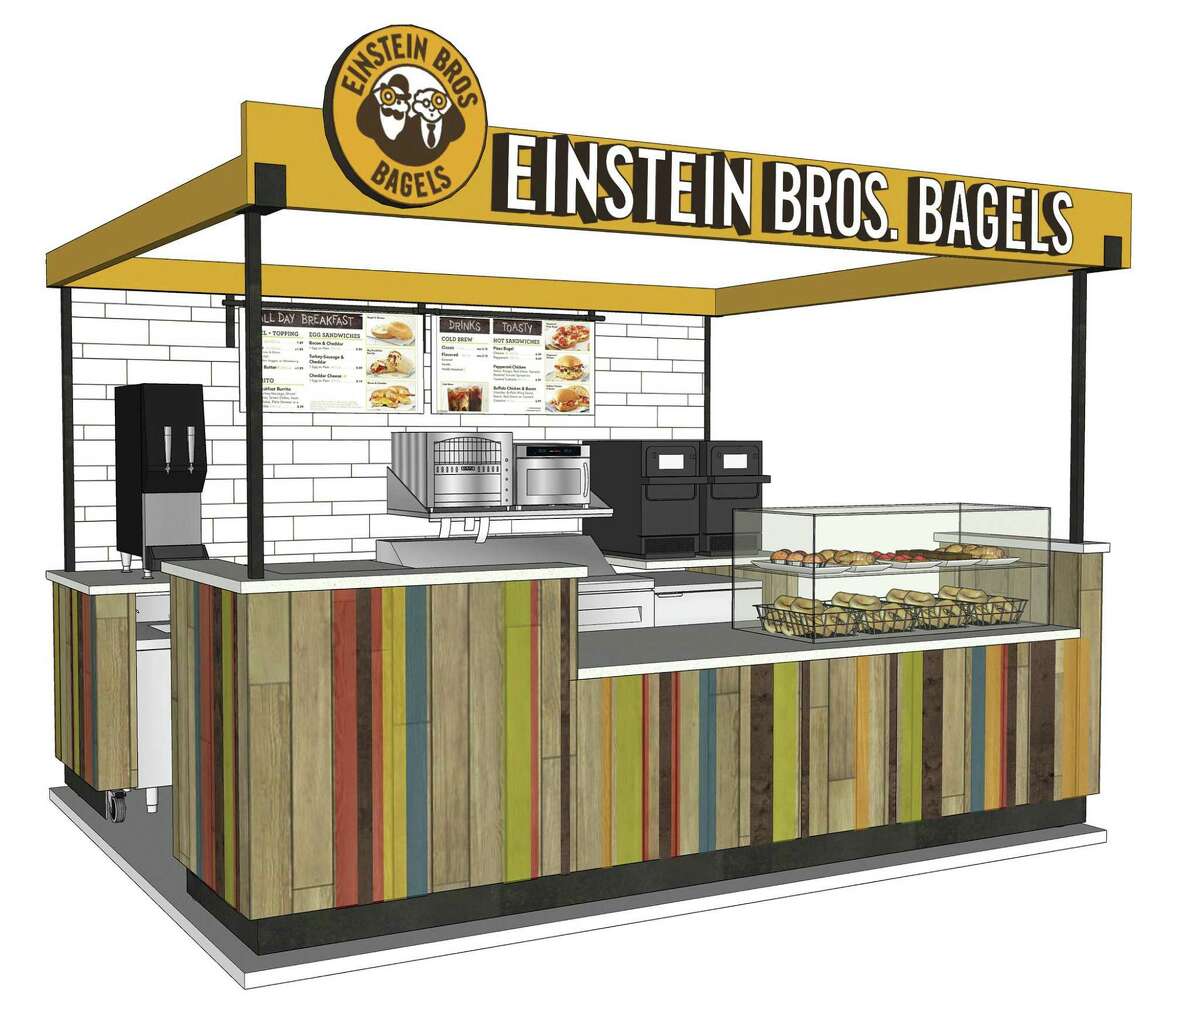 Einstein Bros. Bagels is setting up shop inside convenience stores for the first time. The company signed a five-store development deal with King Fuel in Houston.